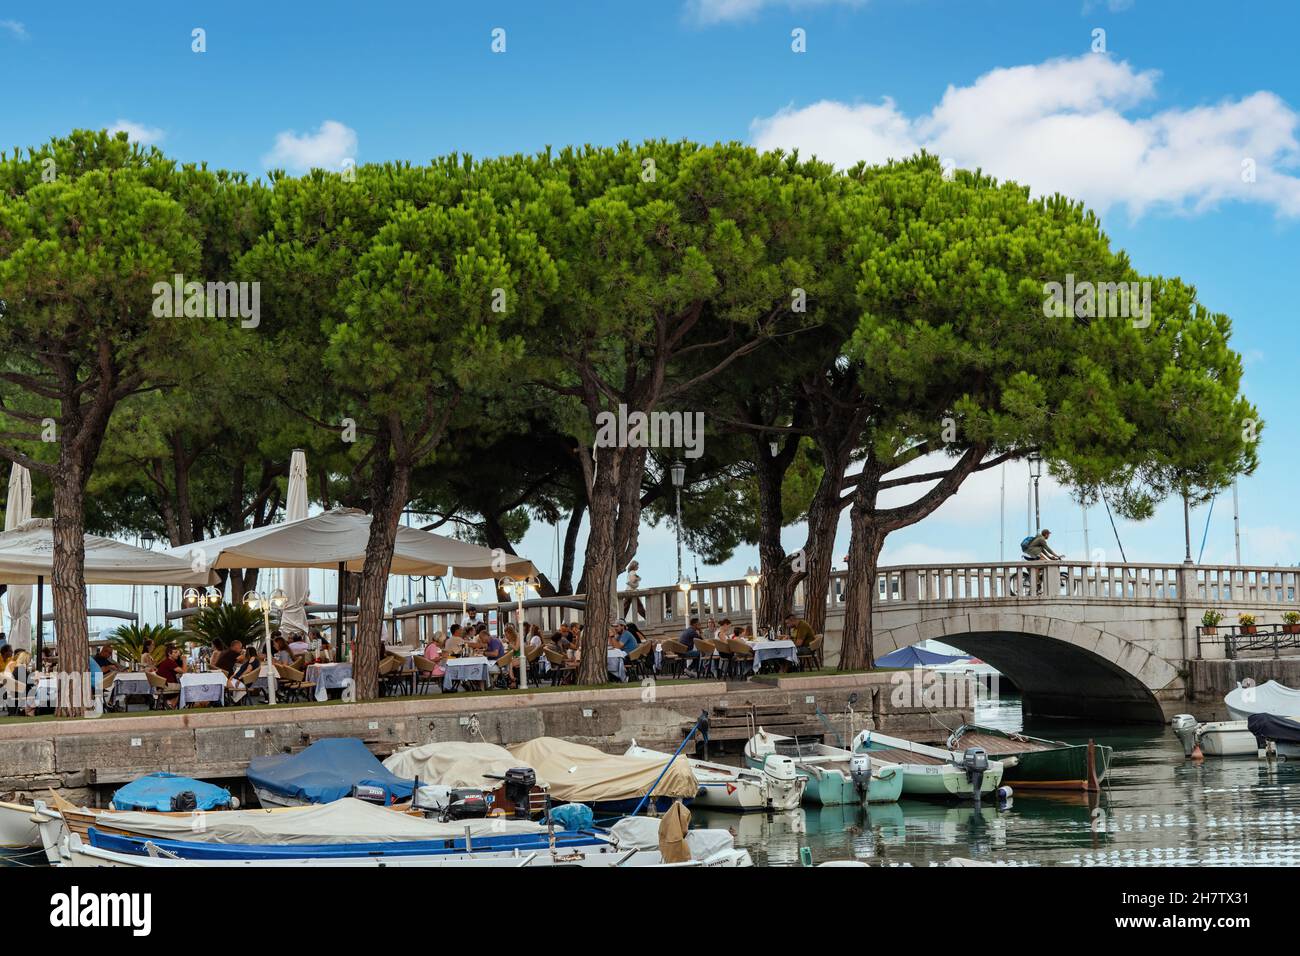 Desenzano, Italy-October 2021; Close up view of people on a terrace under large pine trees in the inner harbor Porto Vecchio with numerous small fishi Stock Photo